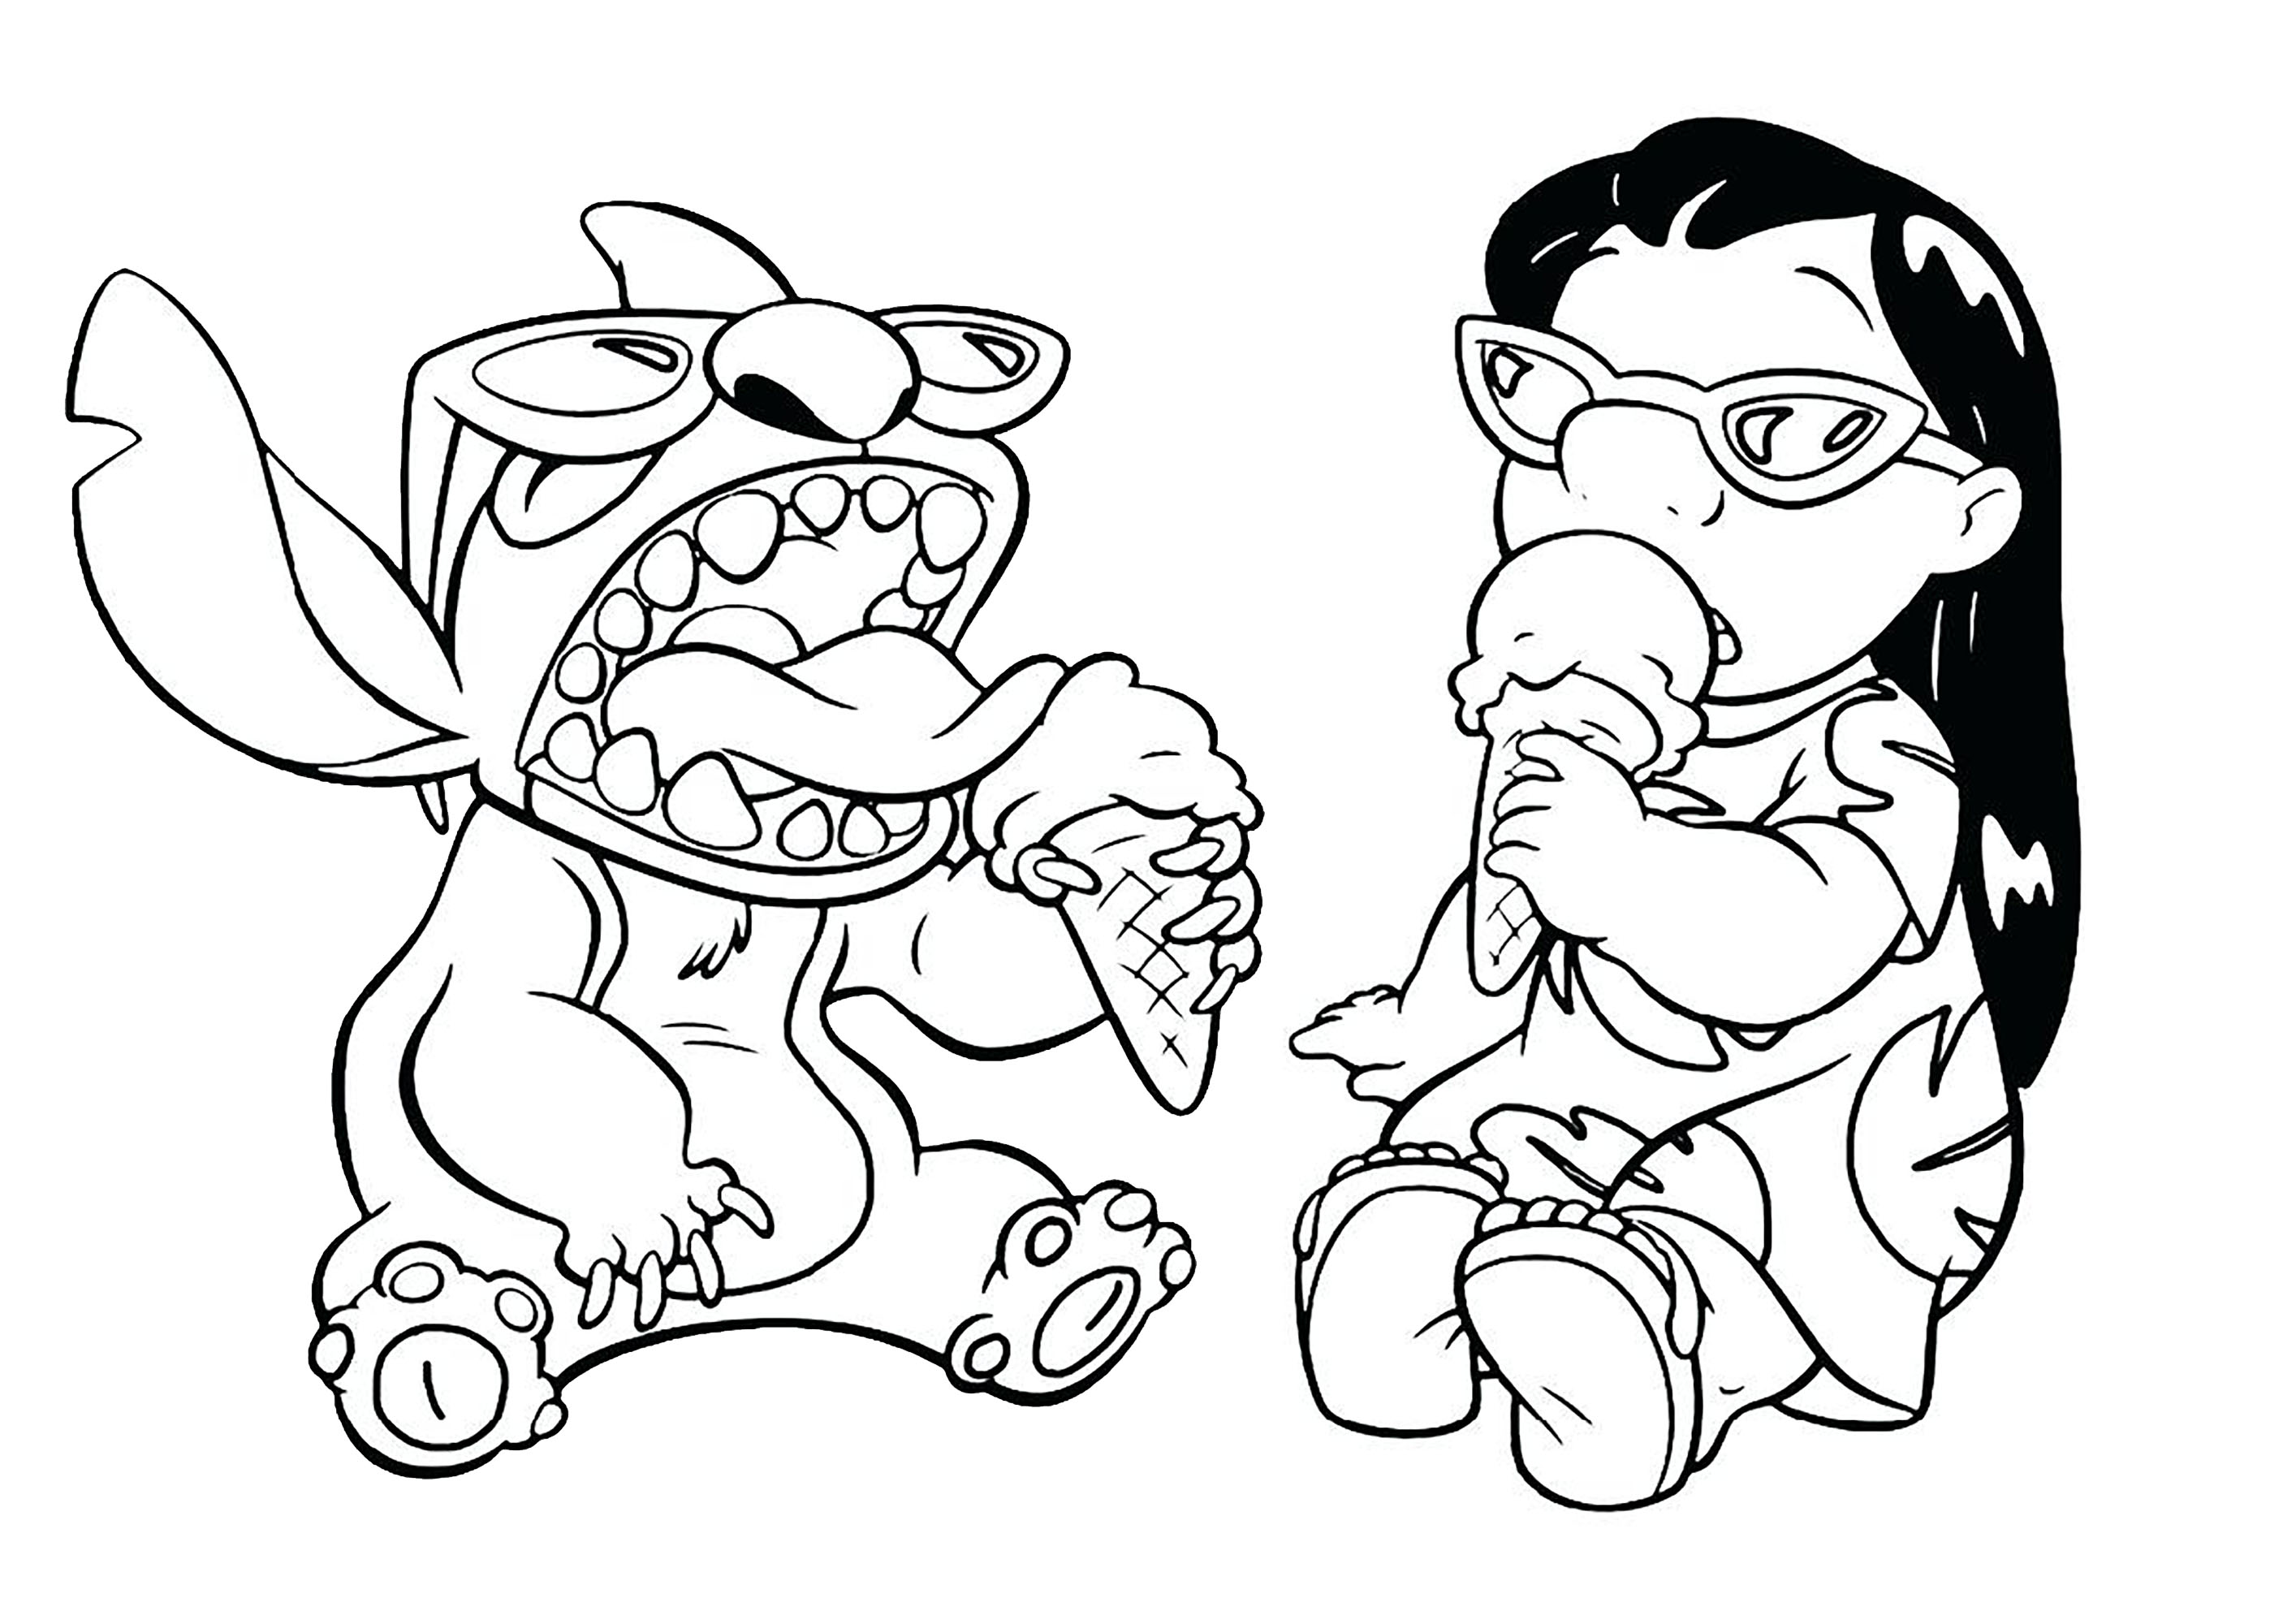 Lilo and Stitch coloring pages for children - Lilo and Stitch Kids ...